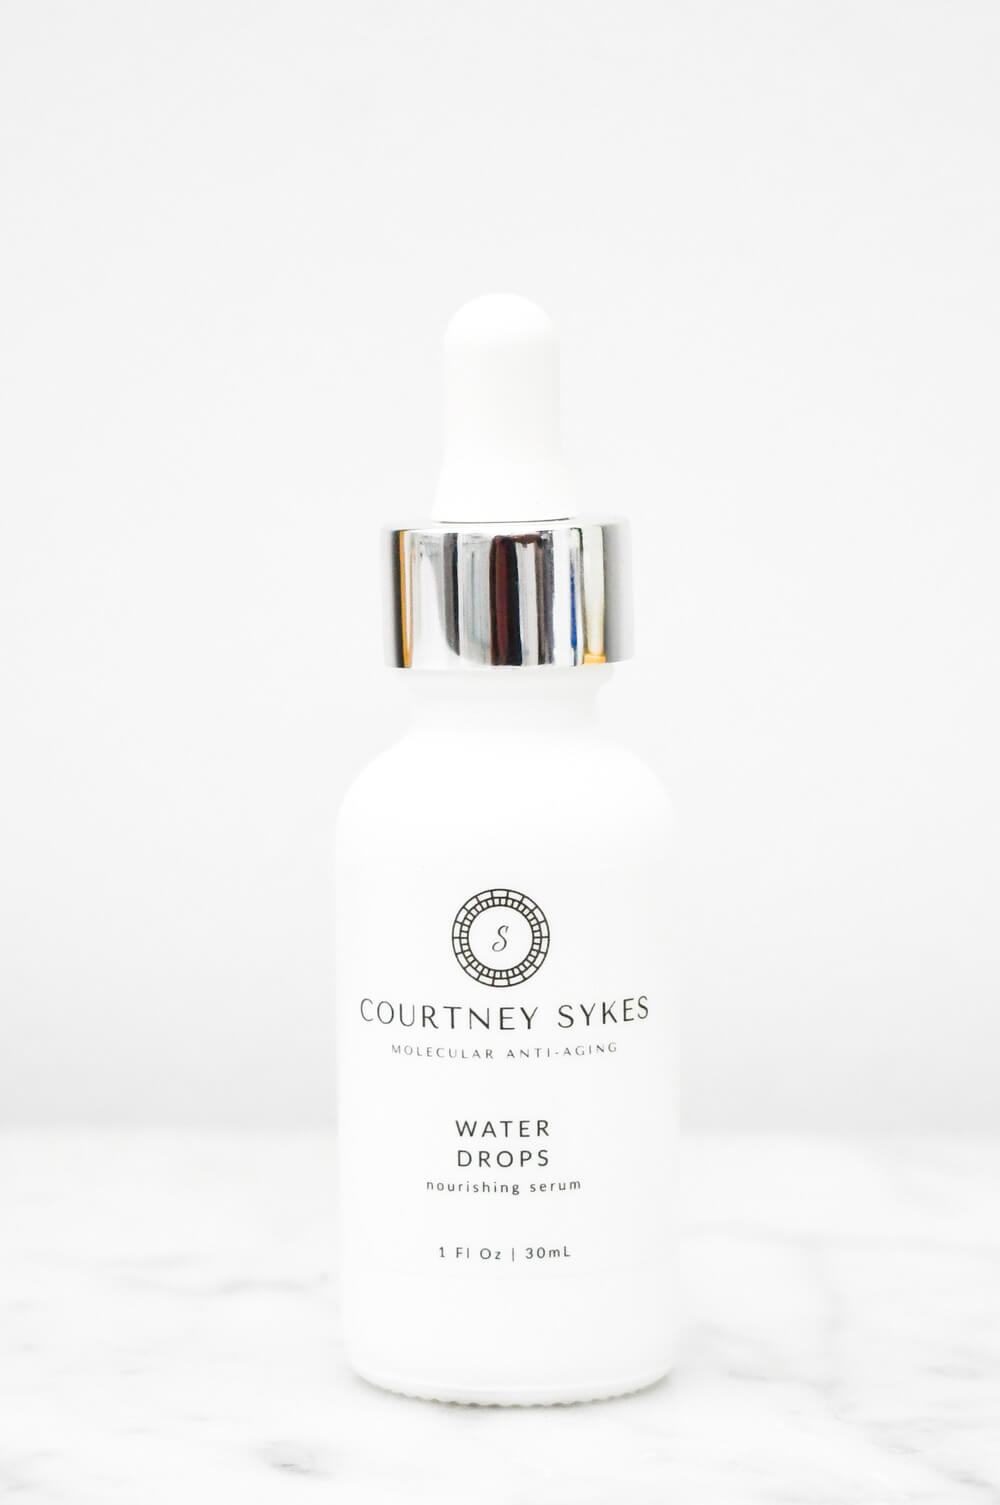 Water Drops – Courtney Sykes Molecular Anti-Aging